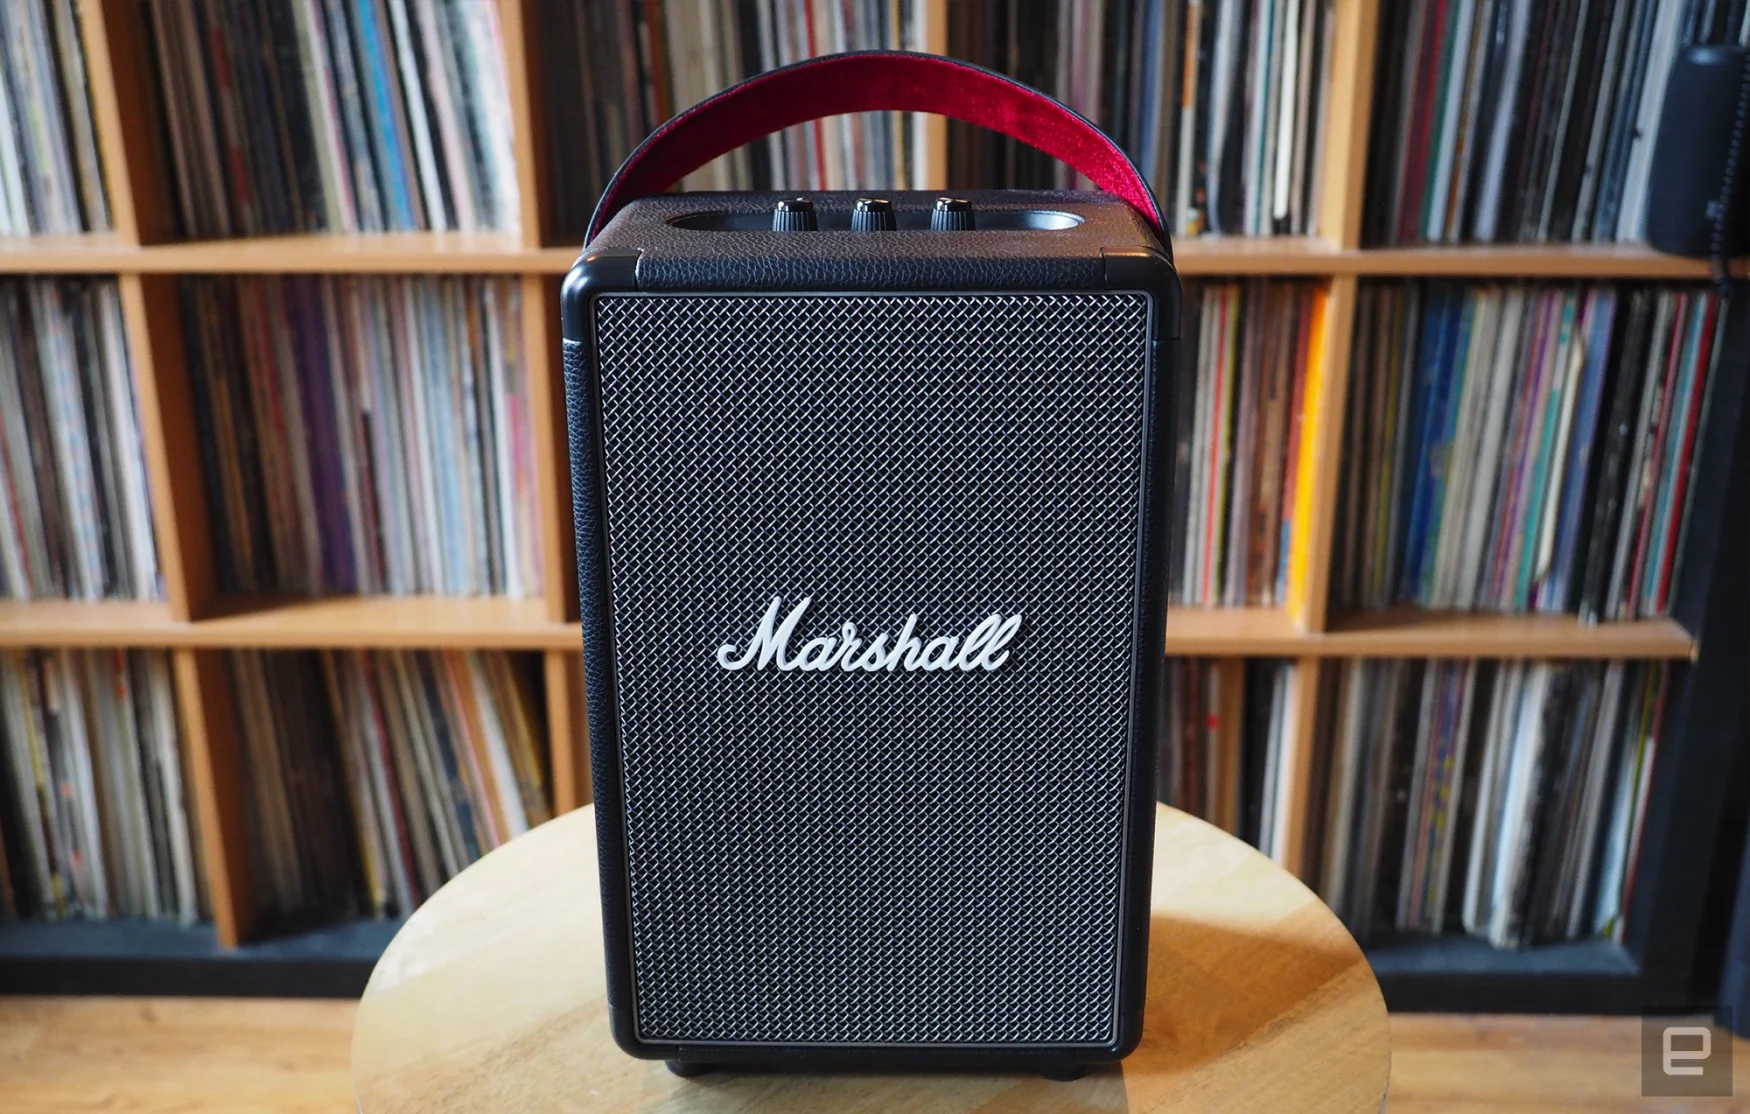 The Marshall Tufton photographed for Engadget's 2022 portable Bluetooth speaker guide in front of a shelf full of records.